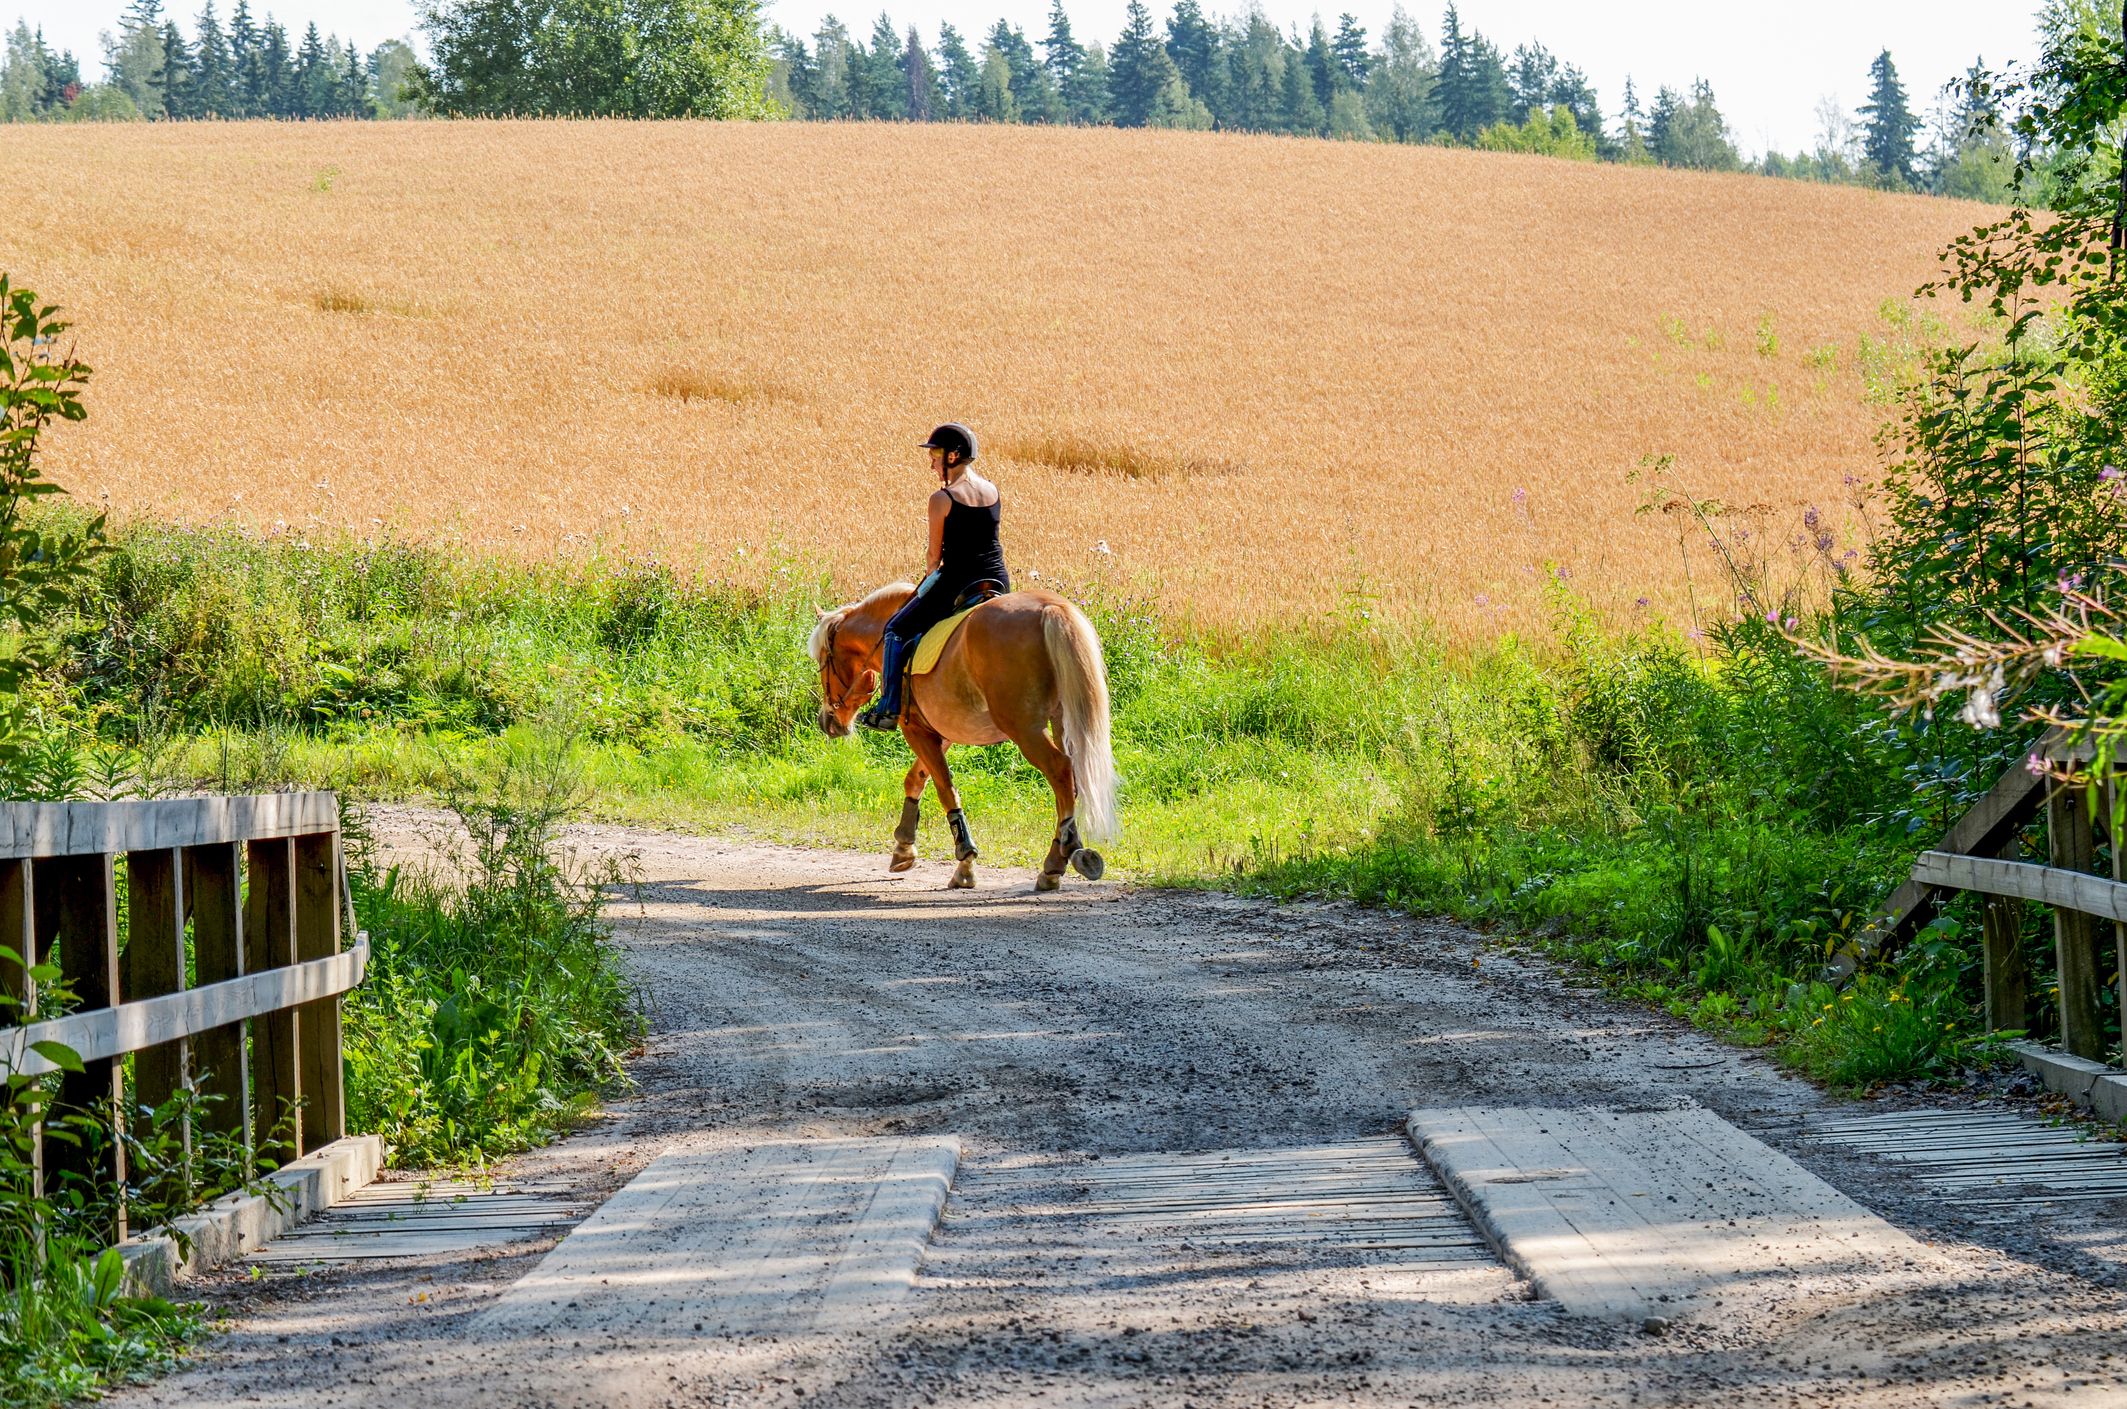 A woman riding a horse past a wooden bridge in summertime. 